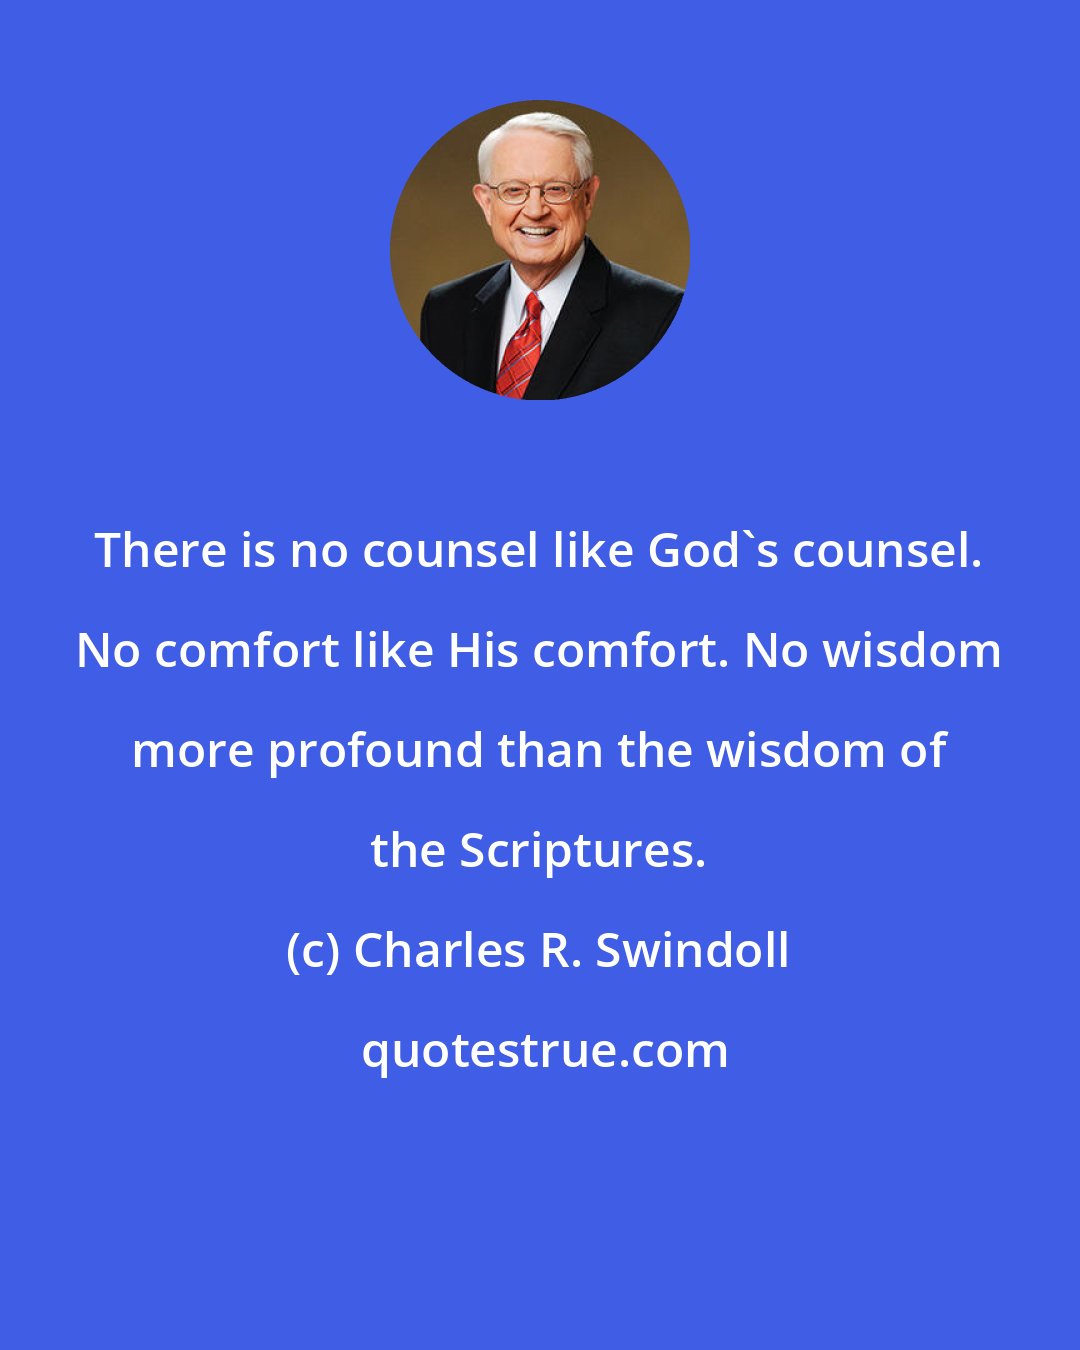 Charles R. Swindoll: There is no counsel like God's counsel. No comfort like His comfort. No wisdom more profound than the wisdom of the Scriptures.